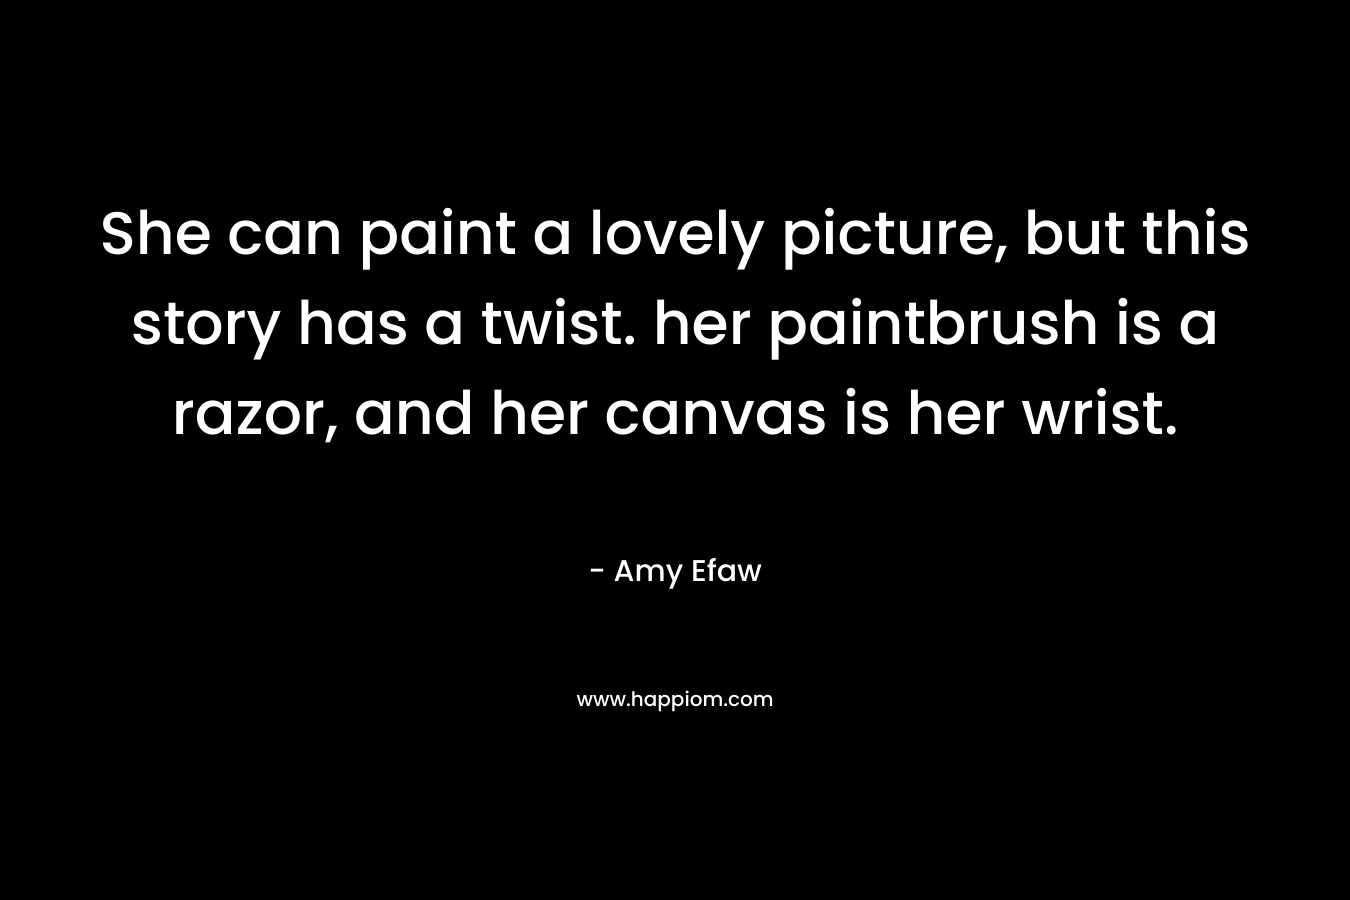 She can paint a lovely picture, but this story has a twist. her paintbrush is a razor, and her canvas is her wrist.